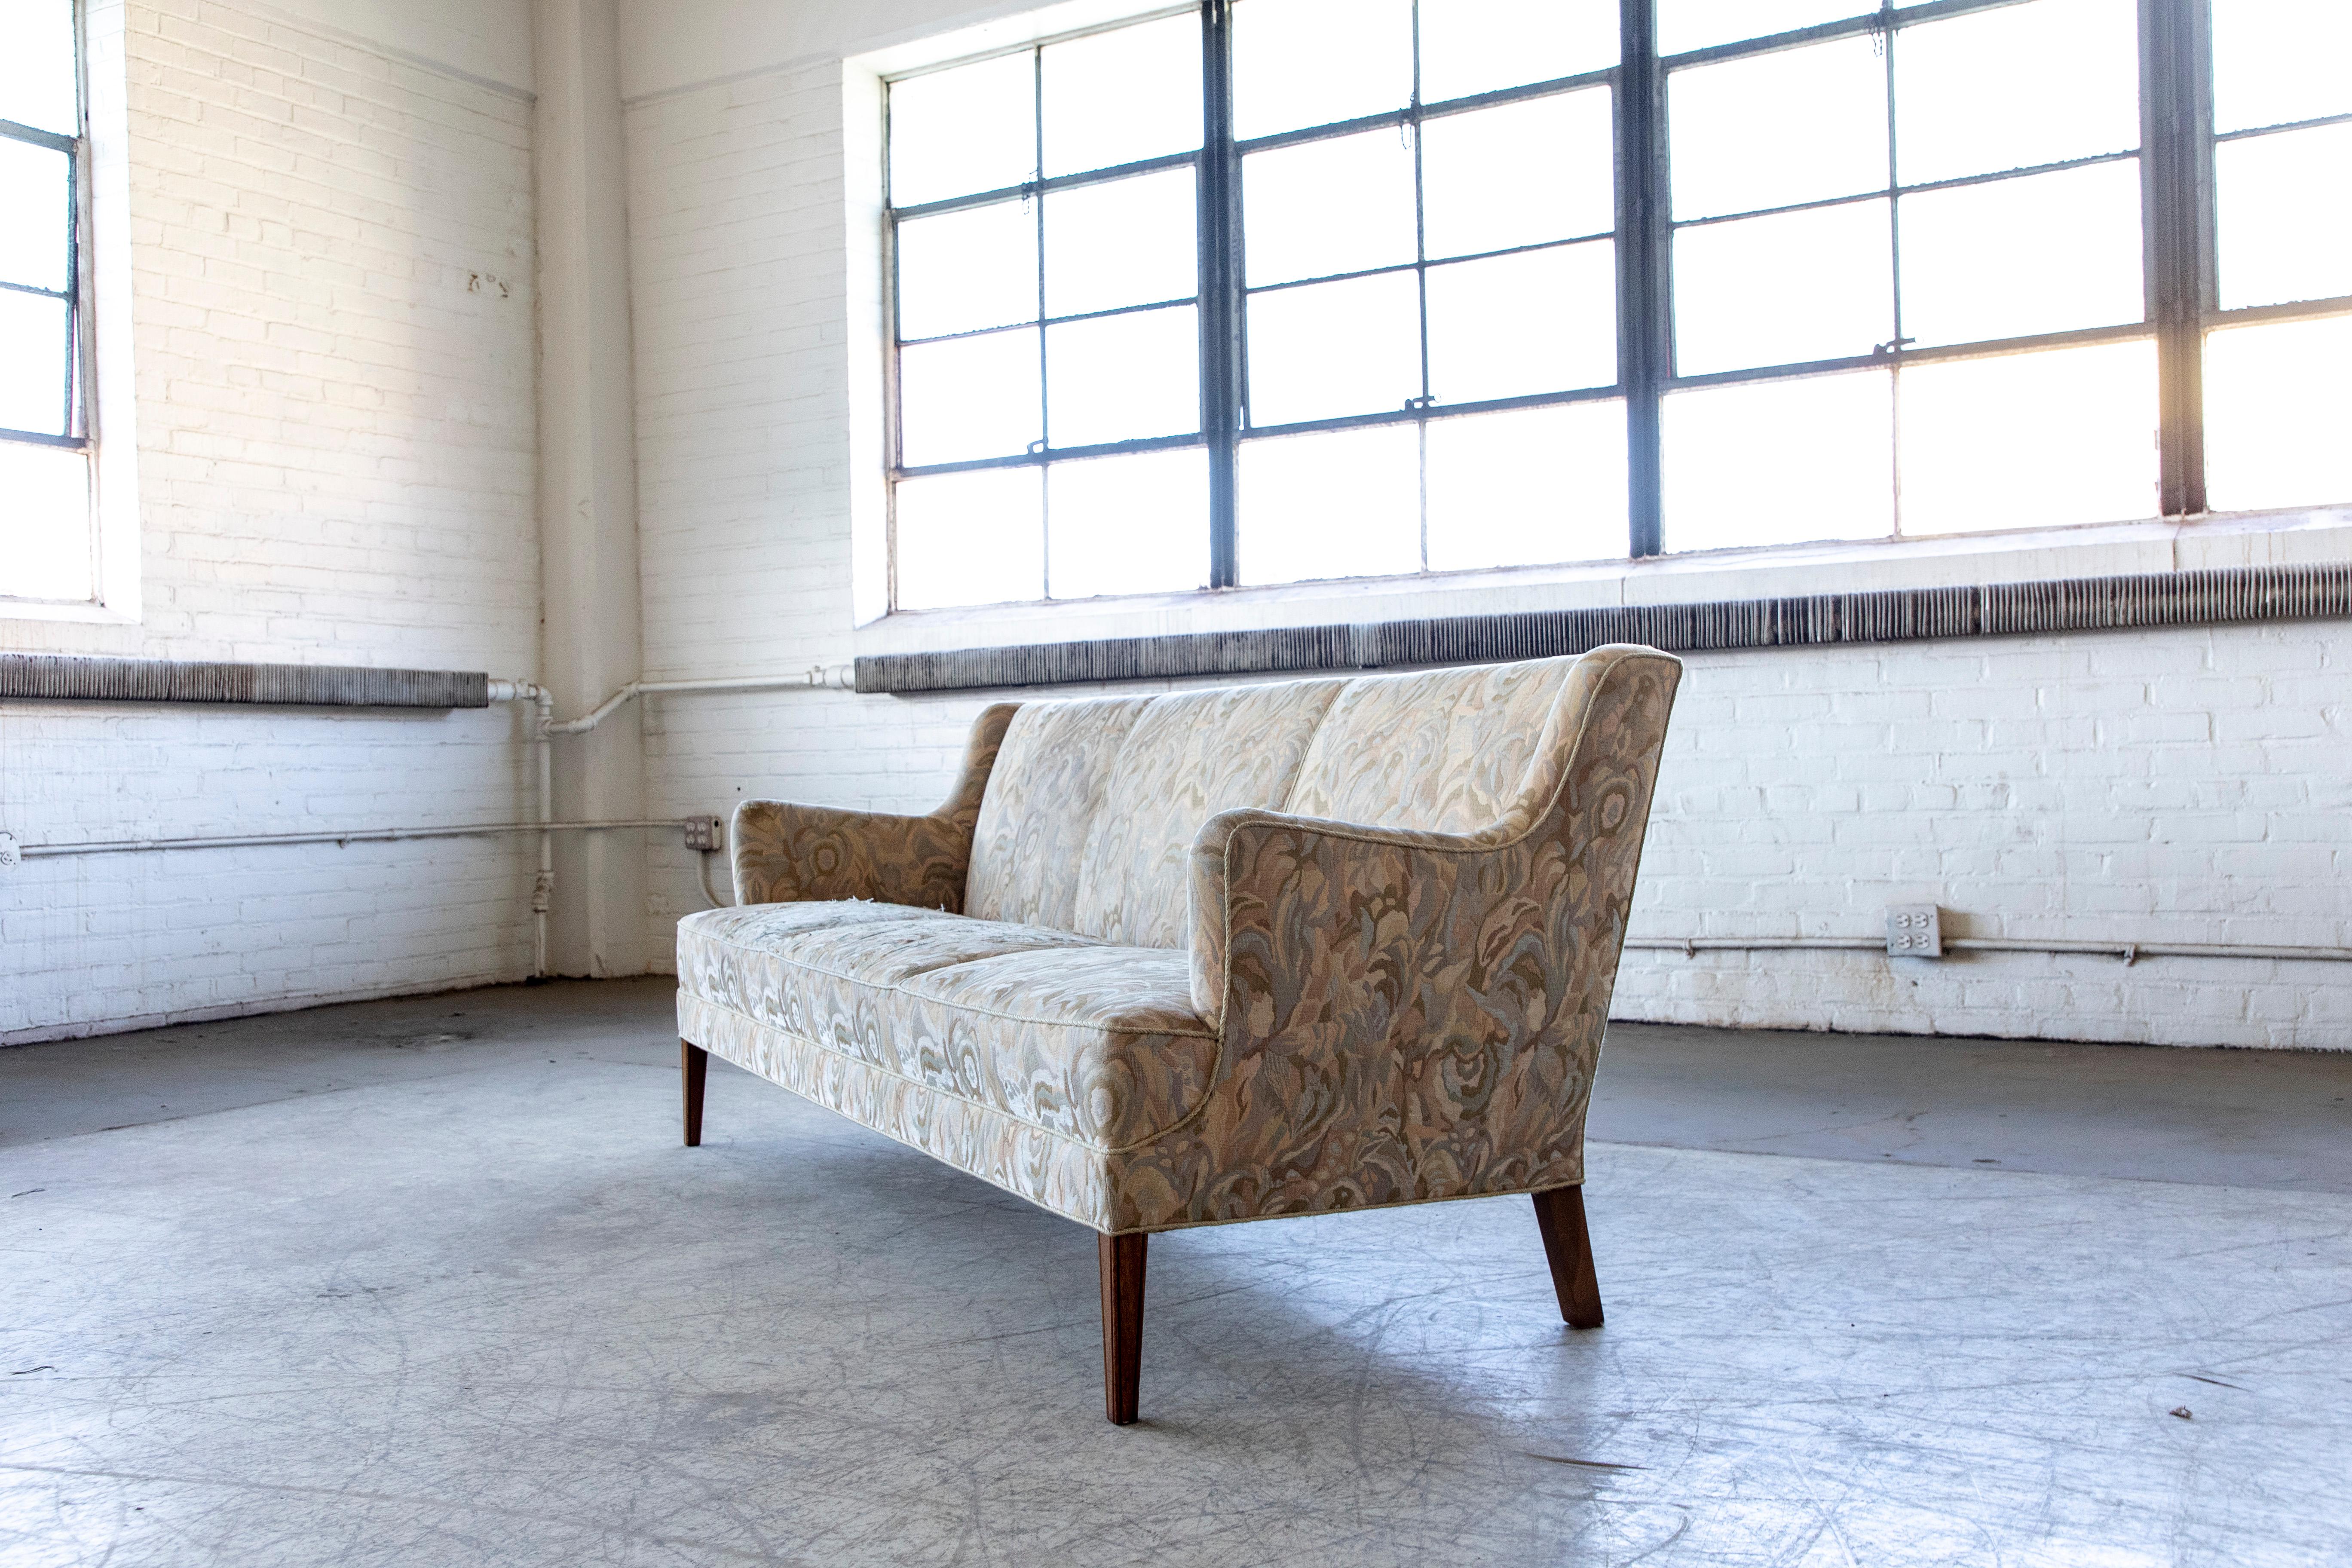 Classic Danish Midcentury Three-seat Sofa by Frits Henningsen 1950's For Sale 1